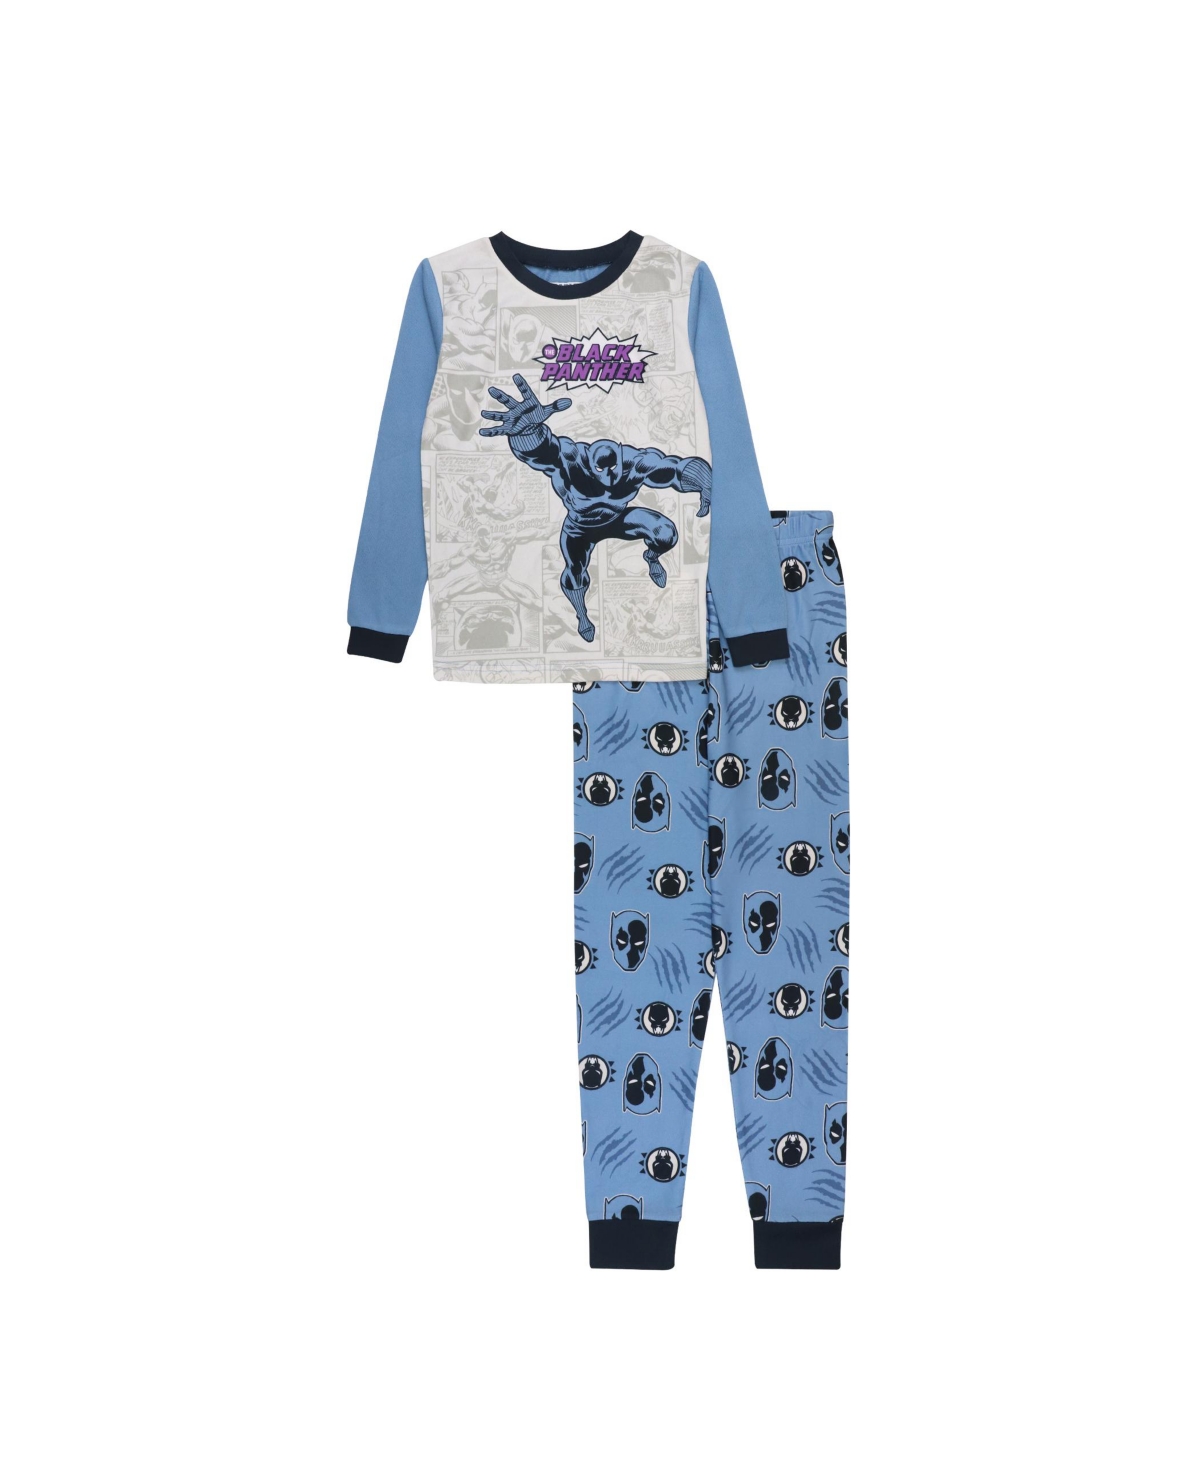 Ame Big Boys Marvel Top And Pajama Set, 2 Piece In Multi